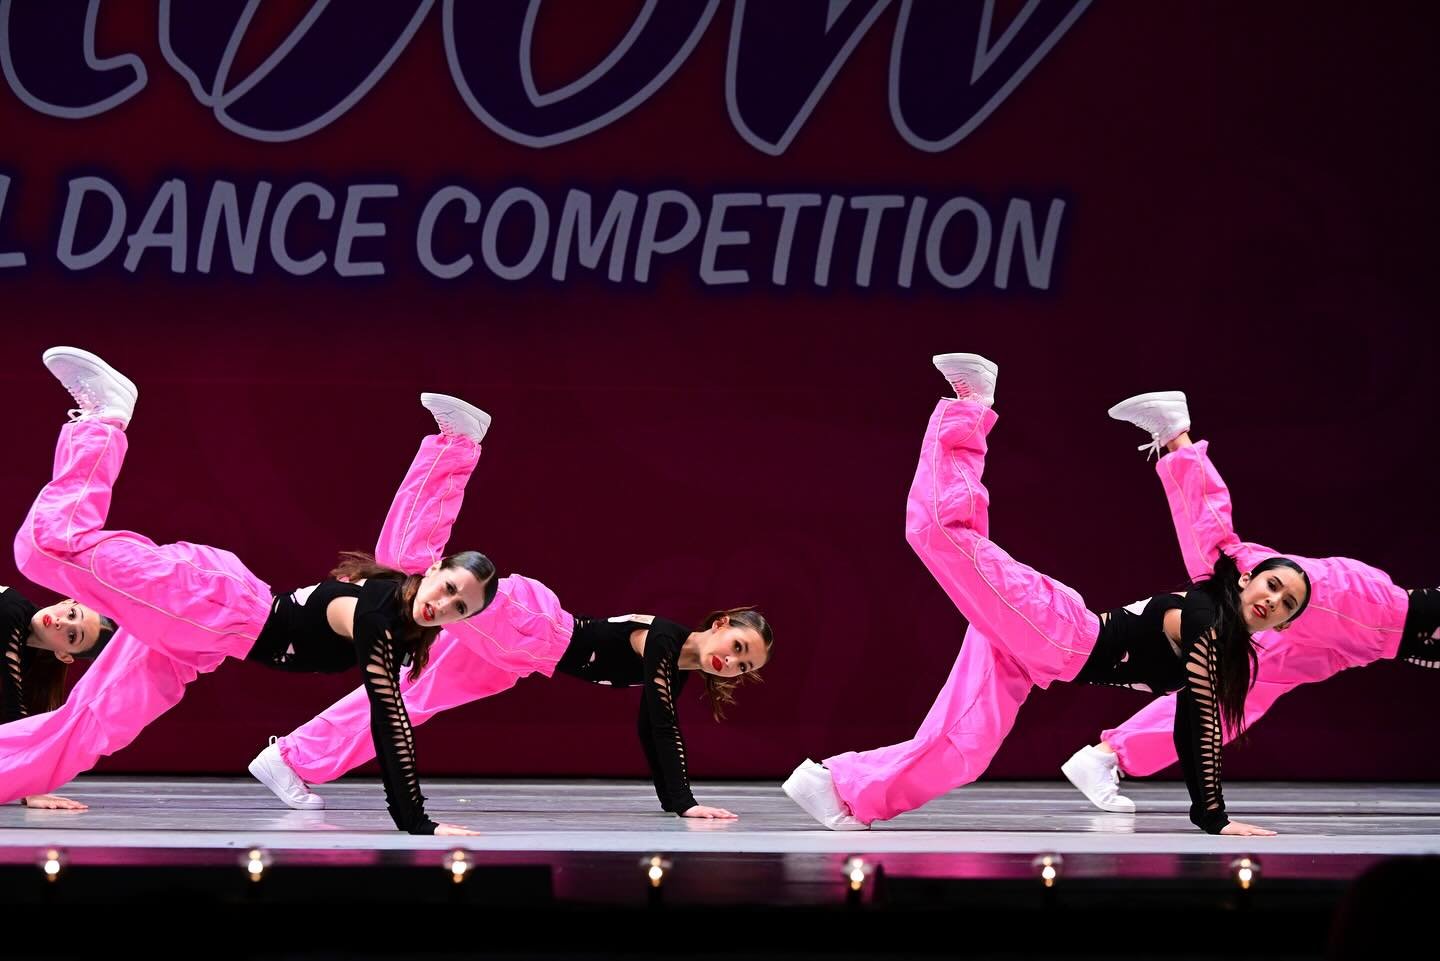 🔥 Diving into this week like:

🤩 Our RAD Dance Company is headed to @tremainedance this weekend and we are so excited!!!